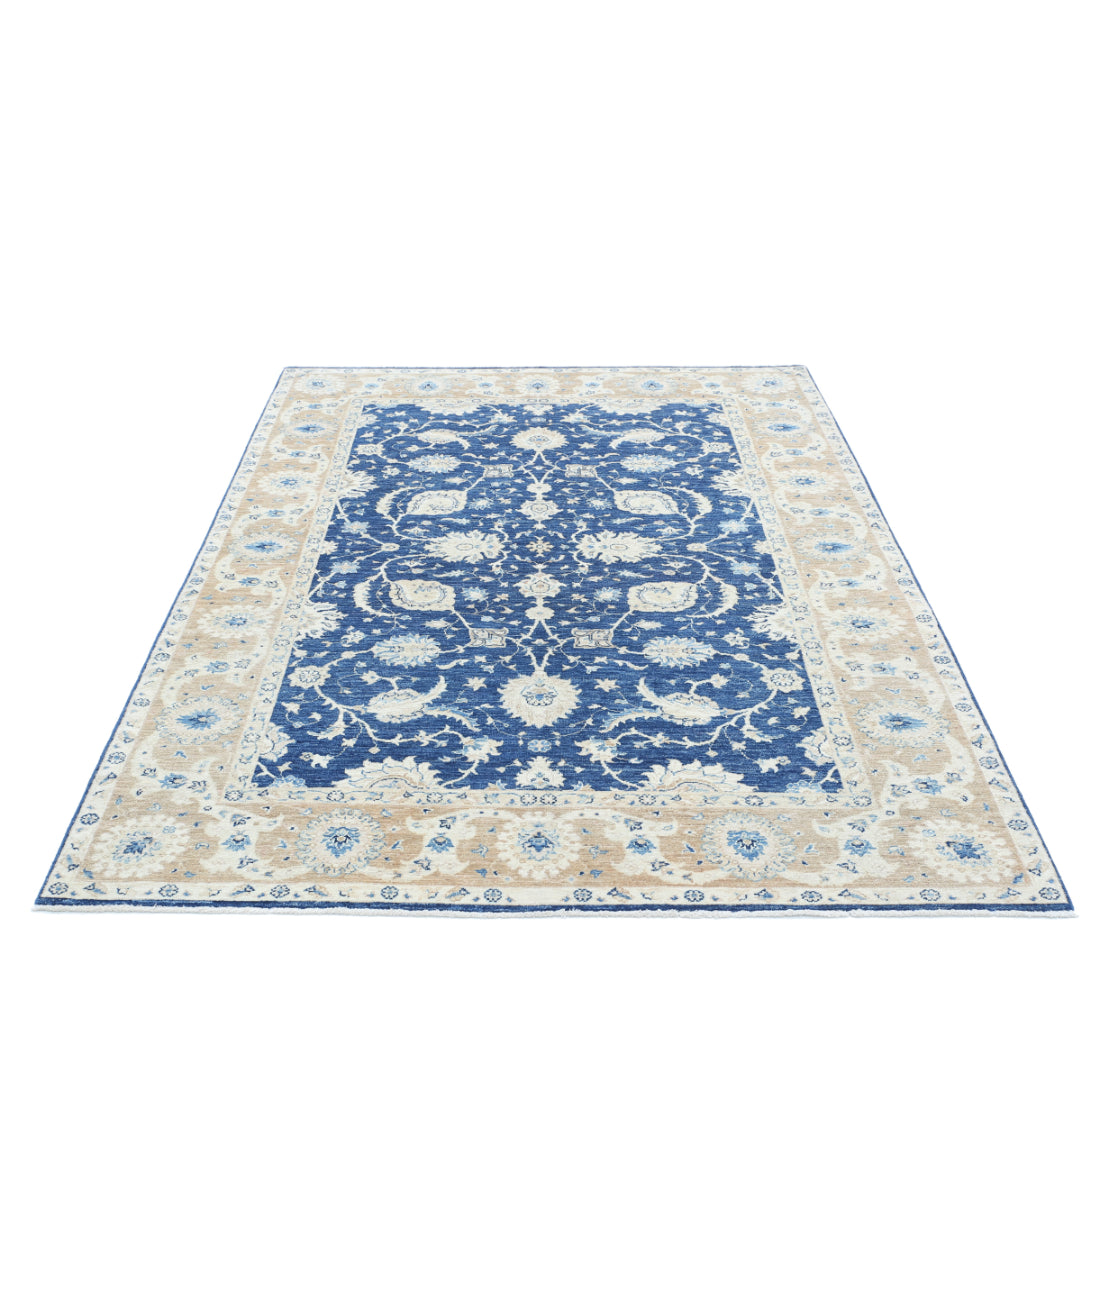 Hand Knotted Ziegler Farhan Wool Rug - 5'8'' x 7'6'' 5'8'' x 7'6'' (170 X 225) / Blue / Taupe